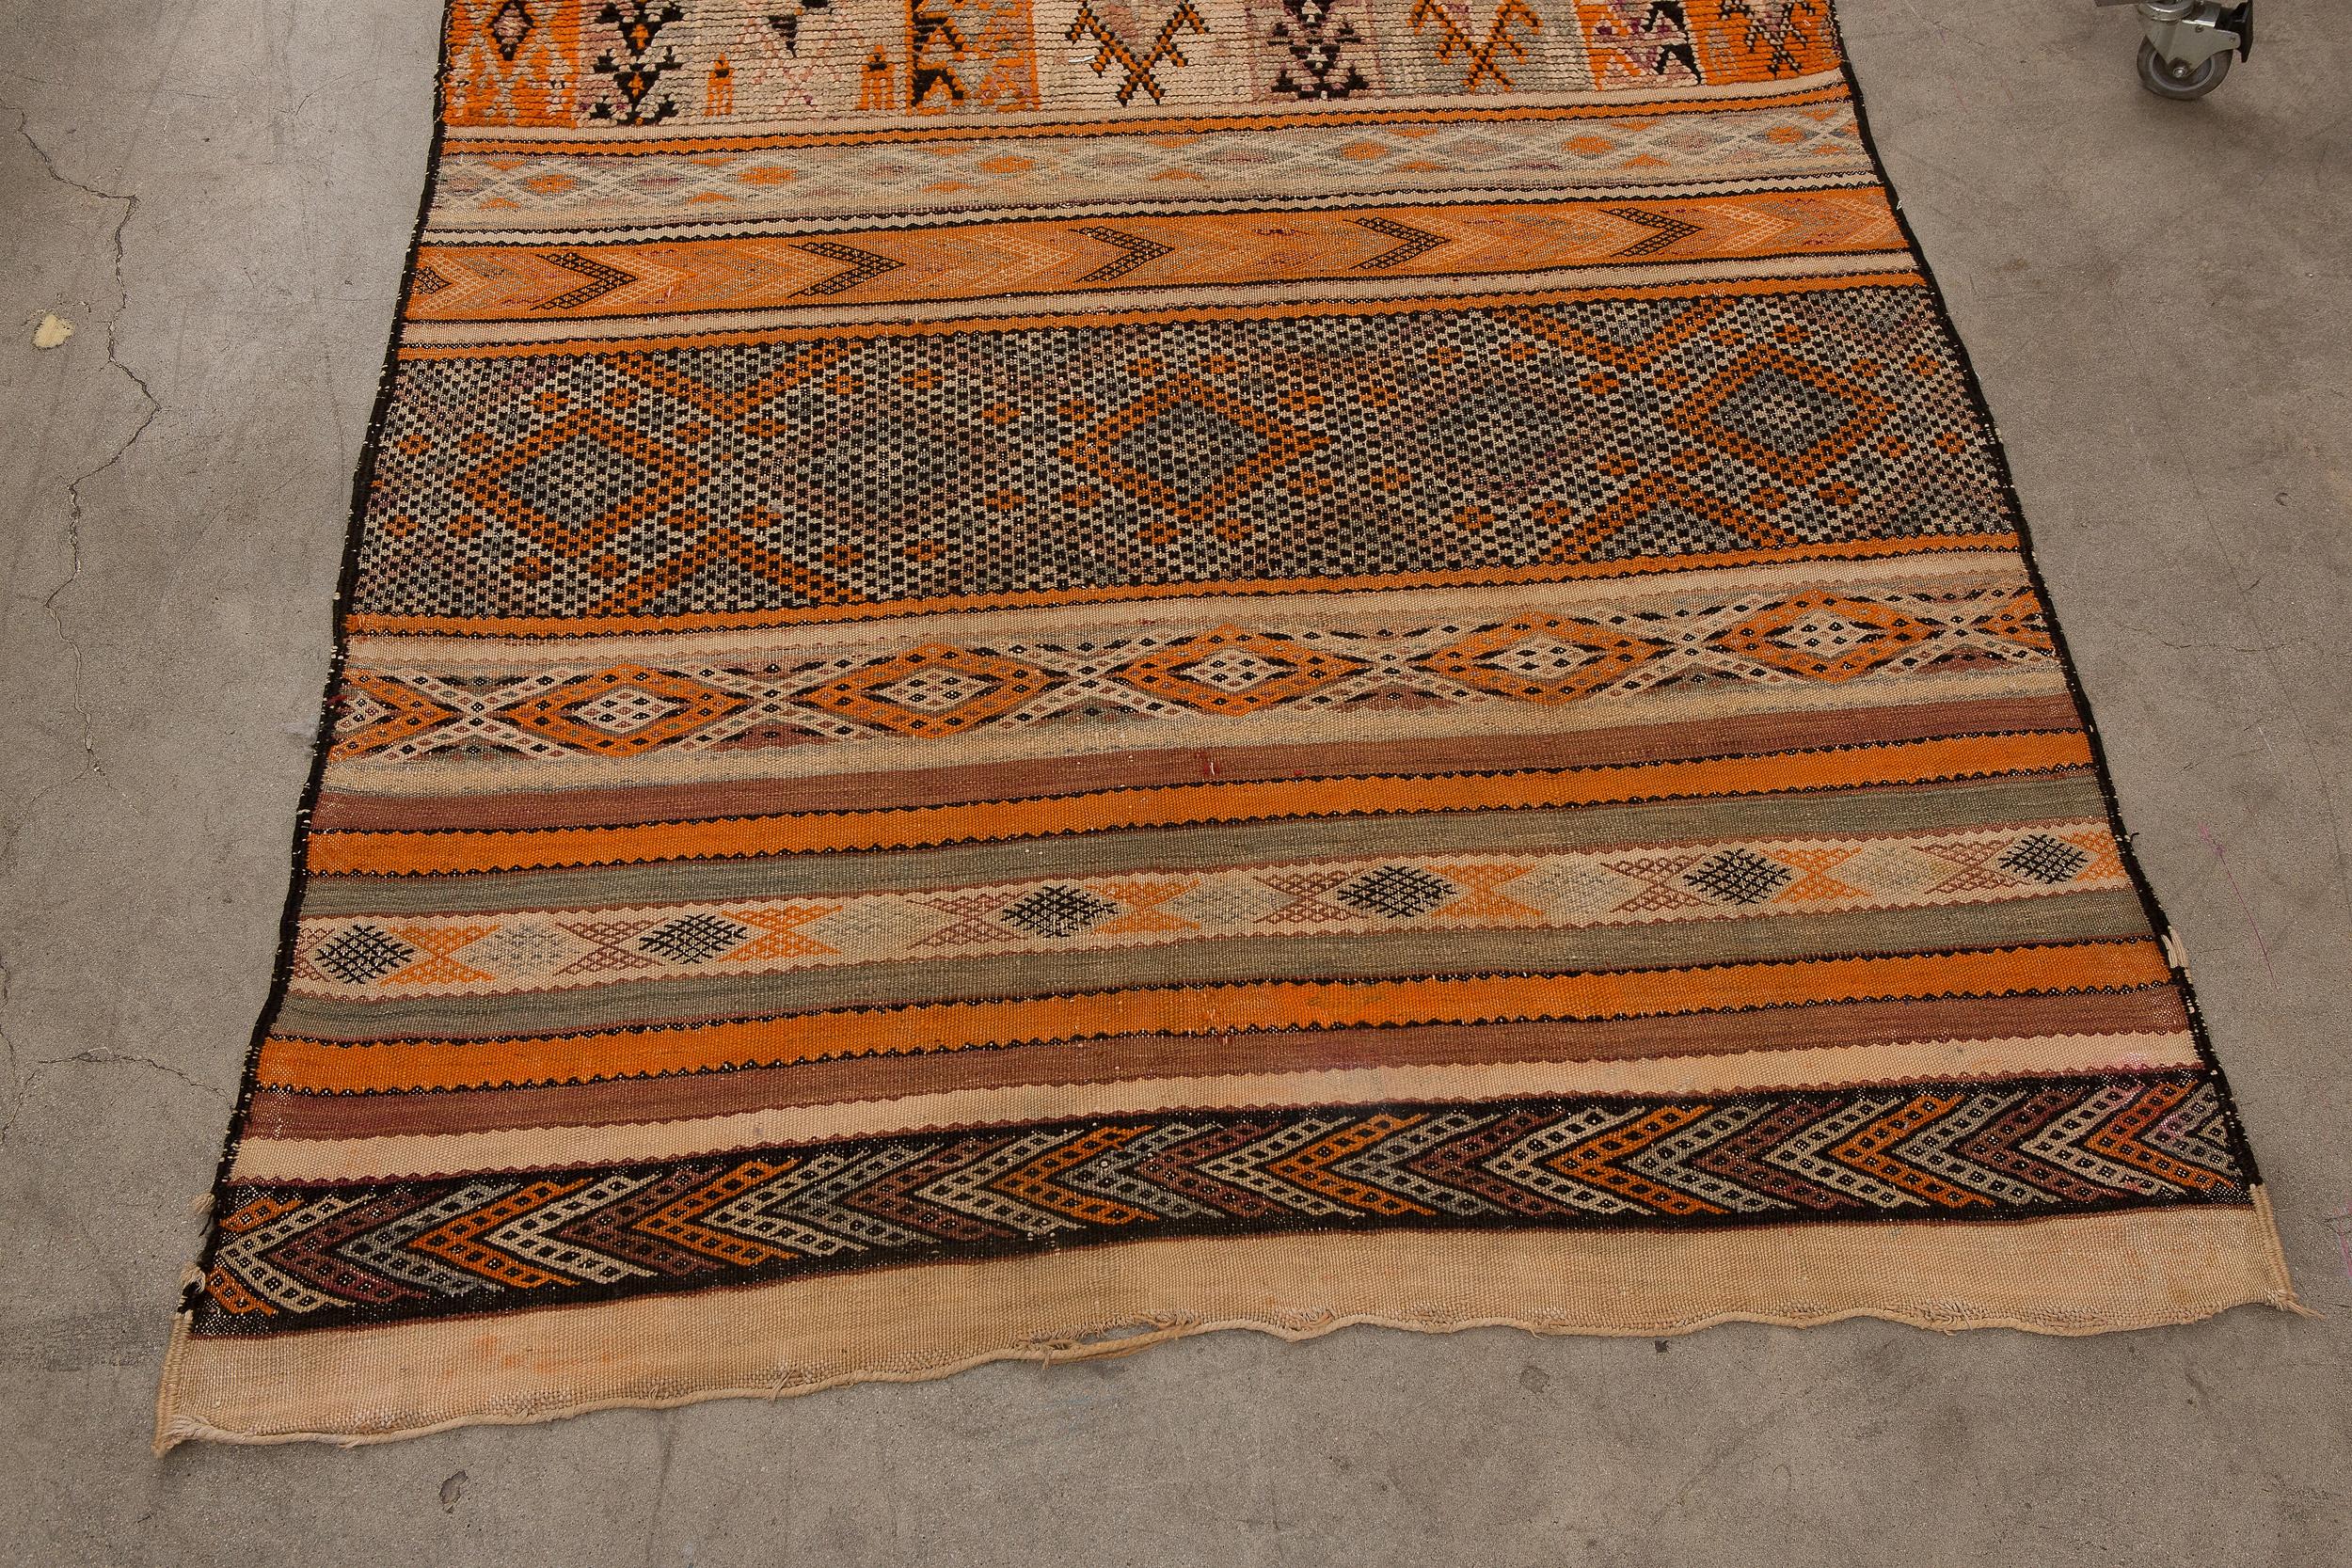 Handmade by Berber women from the Middle Atlas Mountains of Morocco, this flat-weave Kilim rug is woven primarily from wool with the addition of decorative cotton. This piece consists of traditional sets of patterned bands, geometric designs,